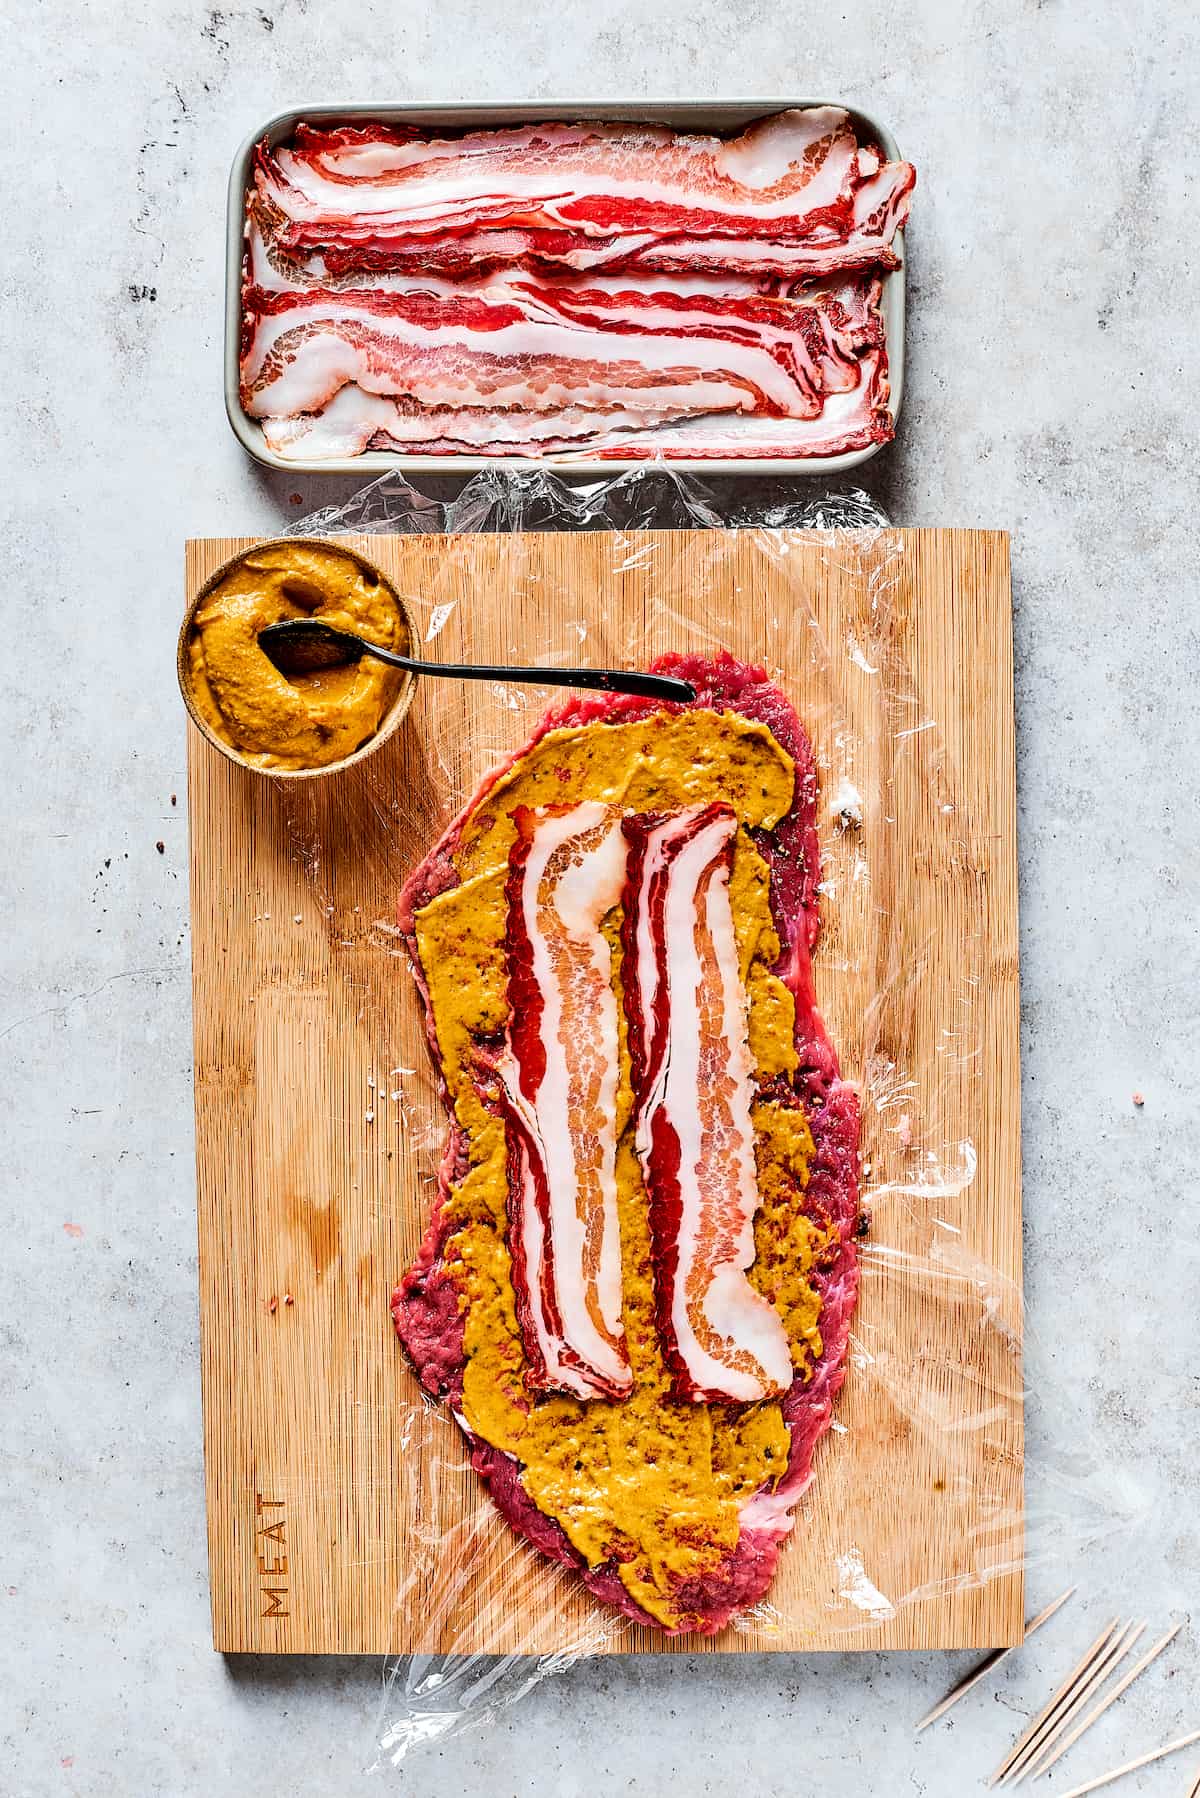 Adding bacon and mustard to a beef strip.